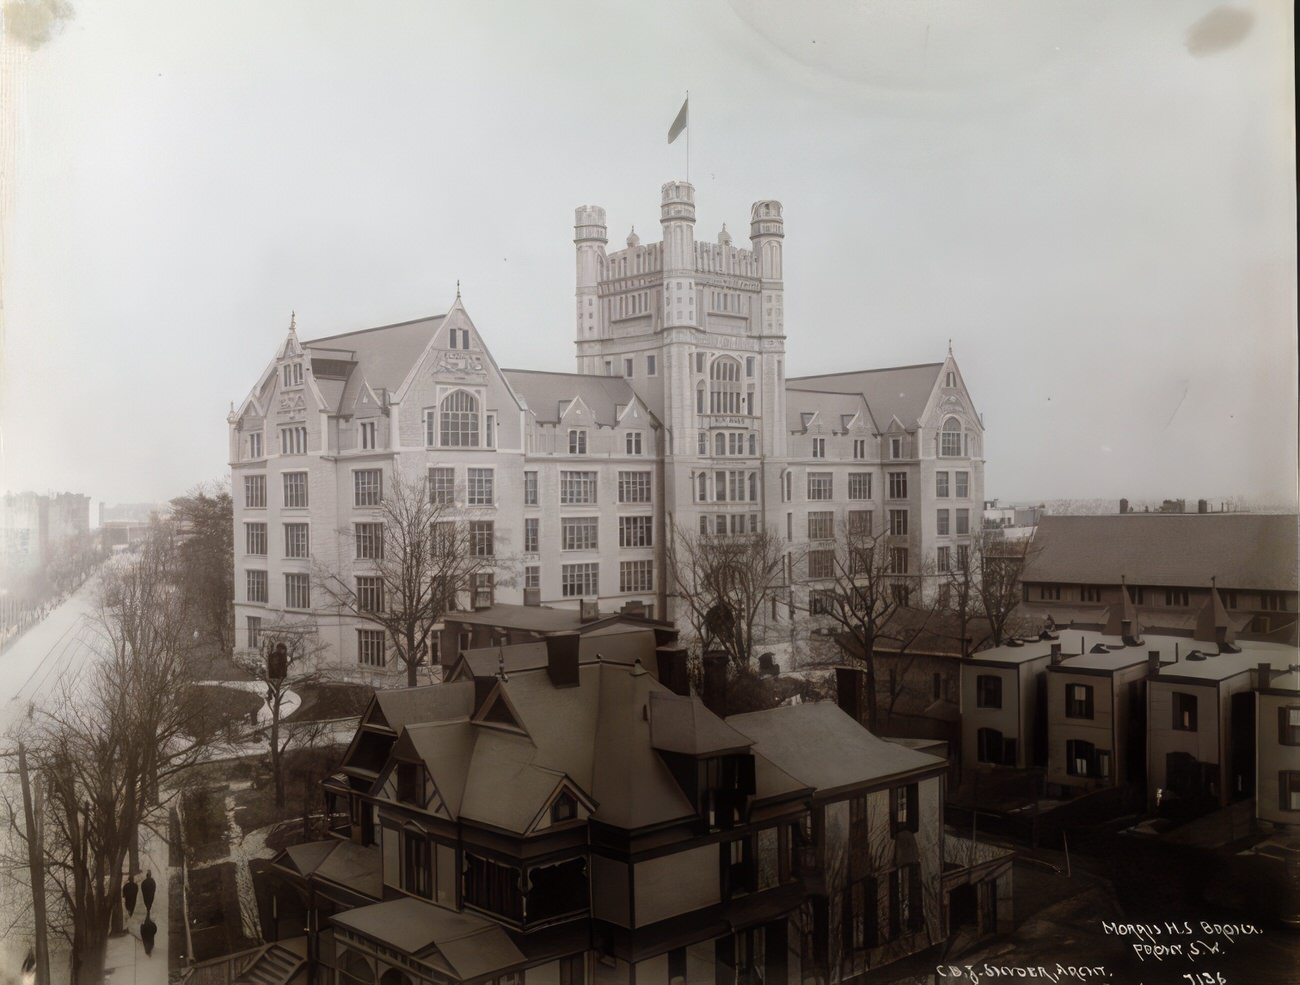 Morris High School In The Bronx From The Front, Southwest, Circa 1903.